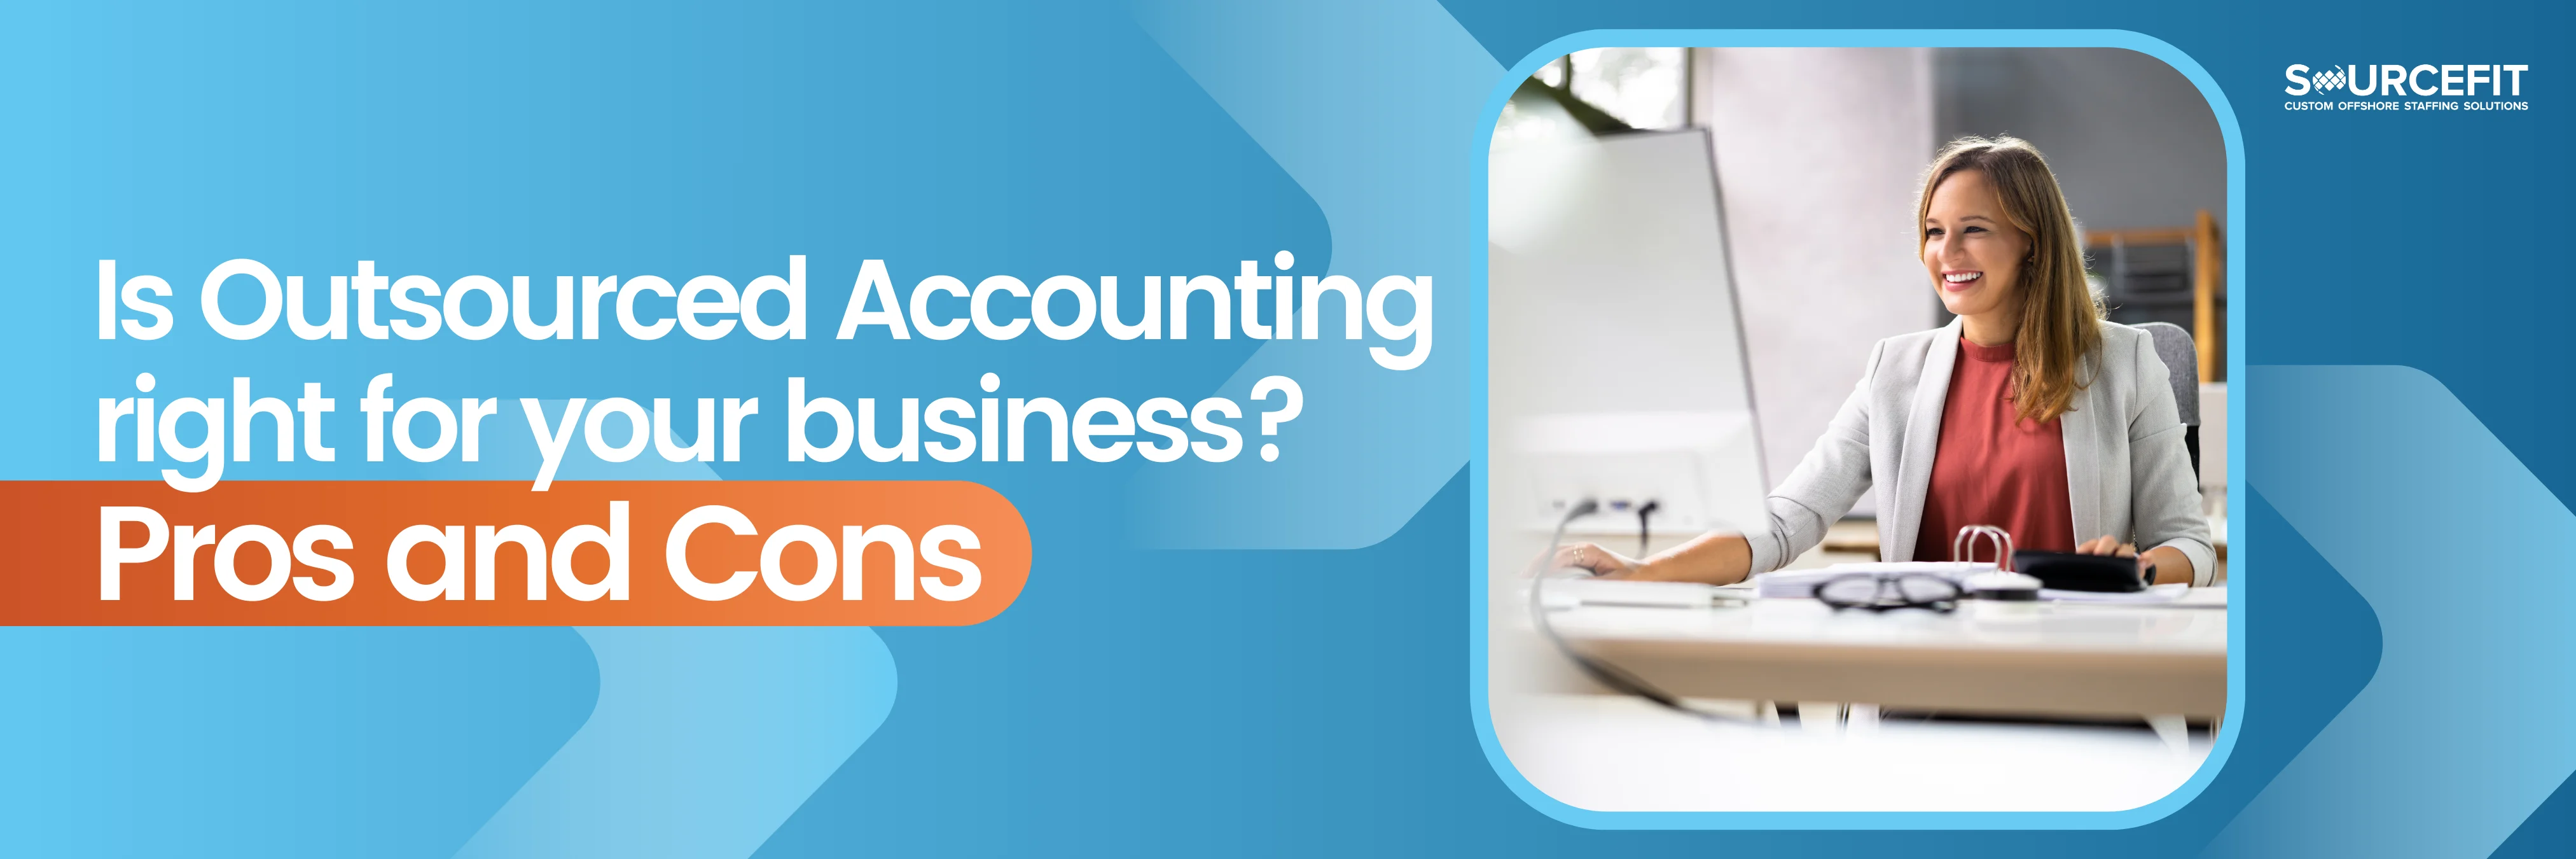 Is-Outsourced-Accounting-right-for-your-business_-Pros-and-Cons_1200x628